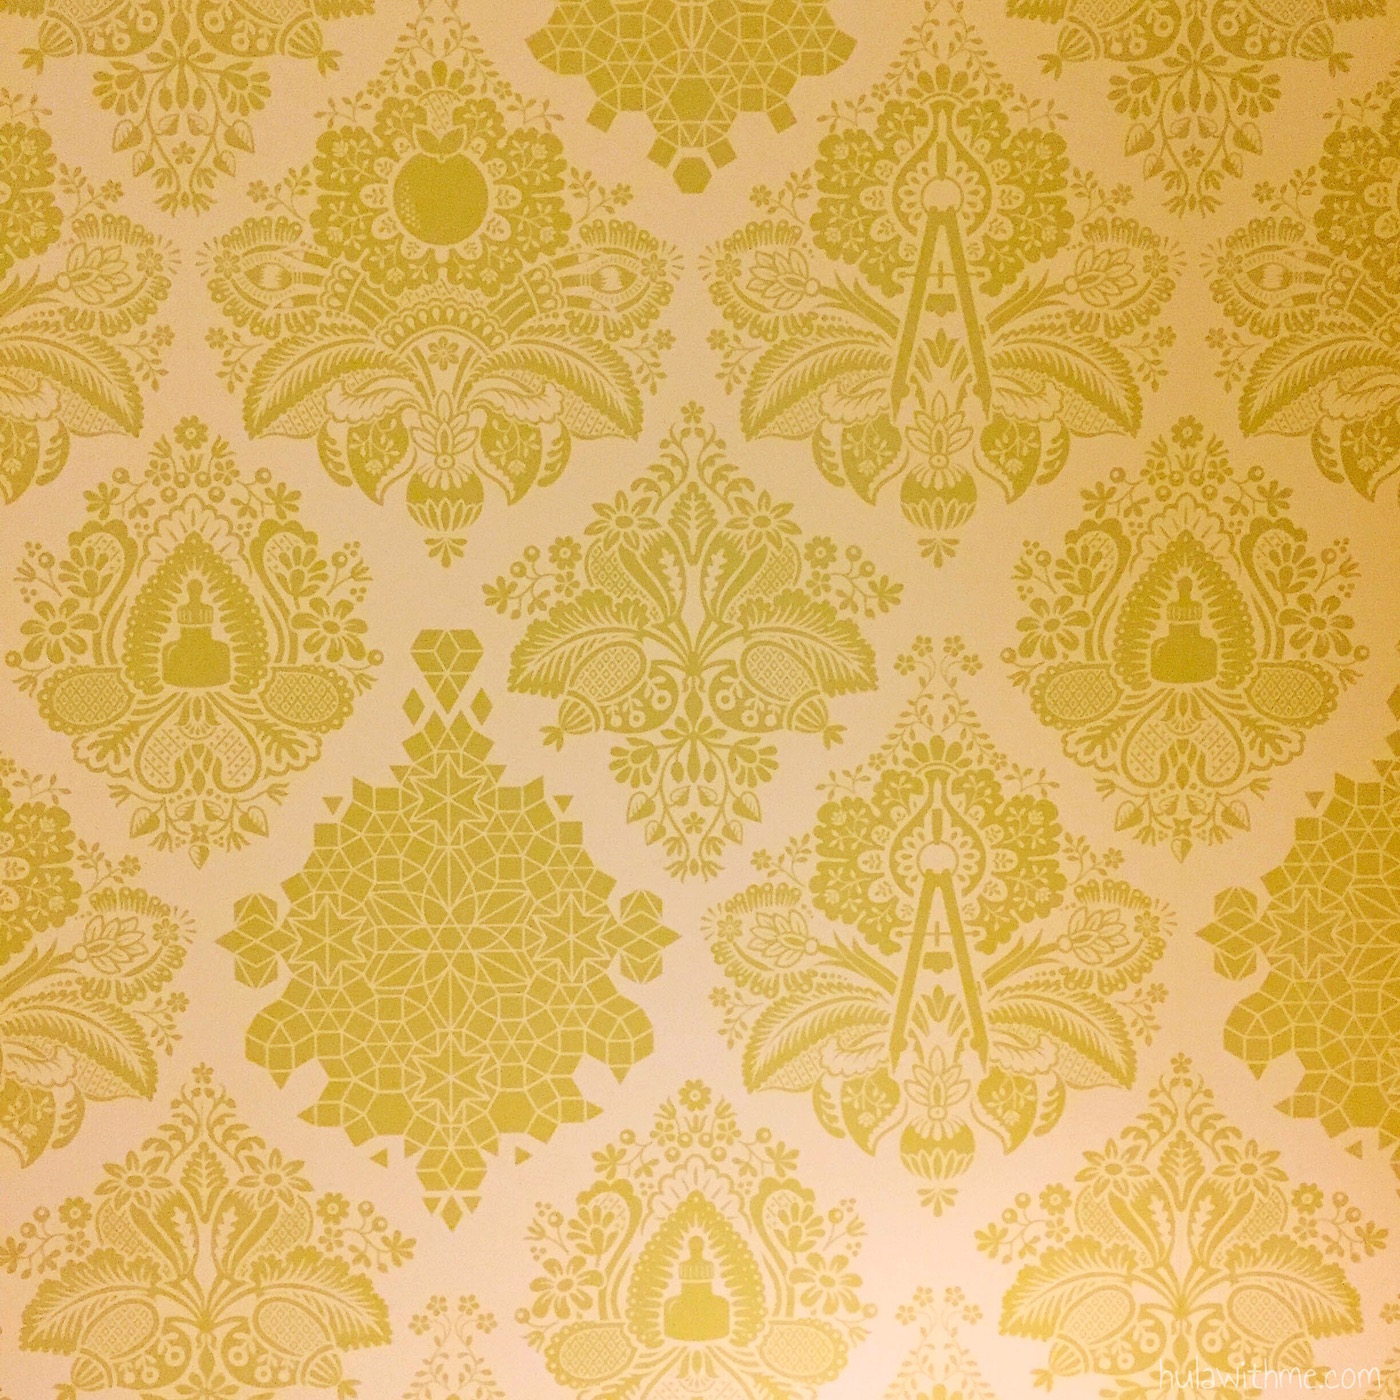 Bliss Spa in Boston, MA: Wall decor to die for.